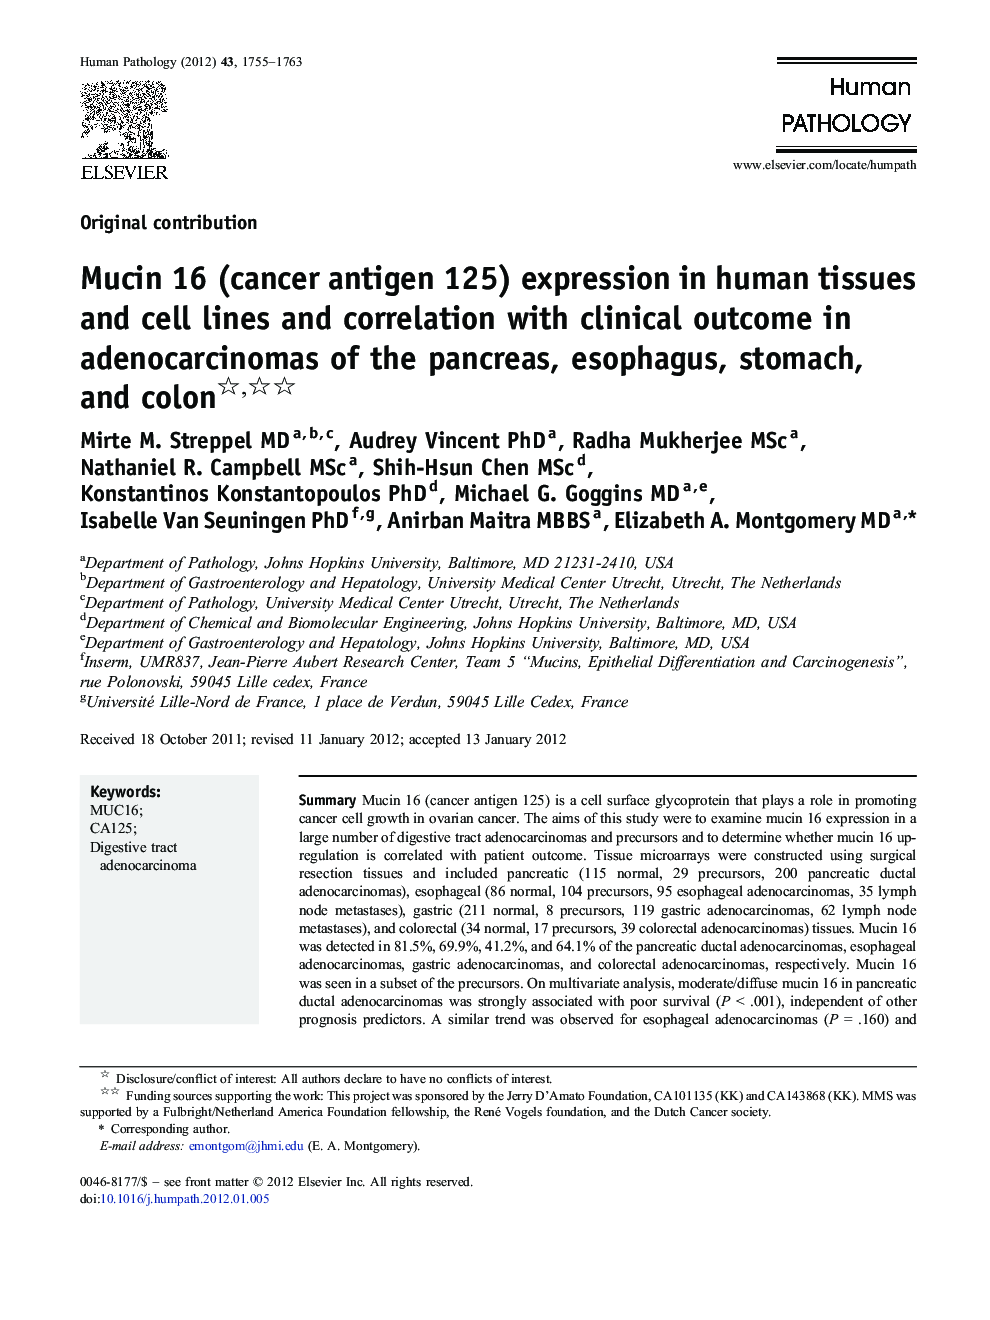 Mucin 16 (cancer antigen 125) expression in human tissues and cell lines and correlation with clinical outcome in adenocarcinomas of the pancreas, esophagus, stomach, and colon 